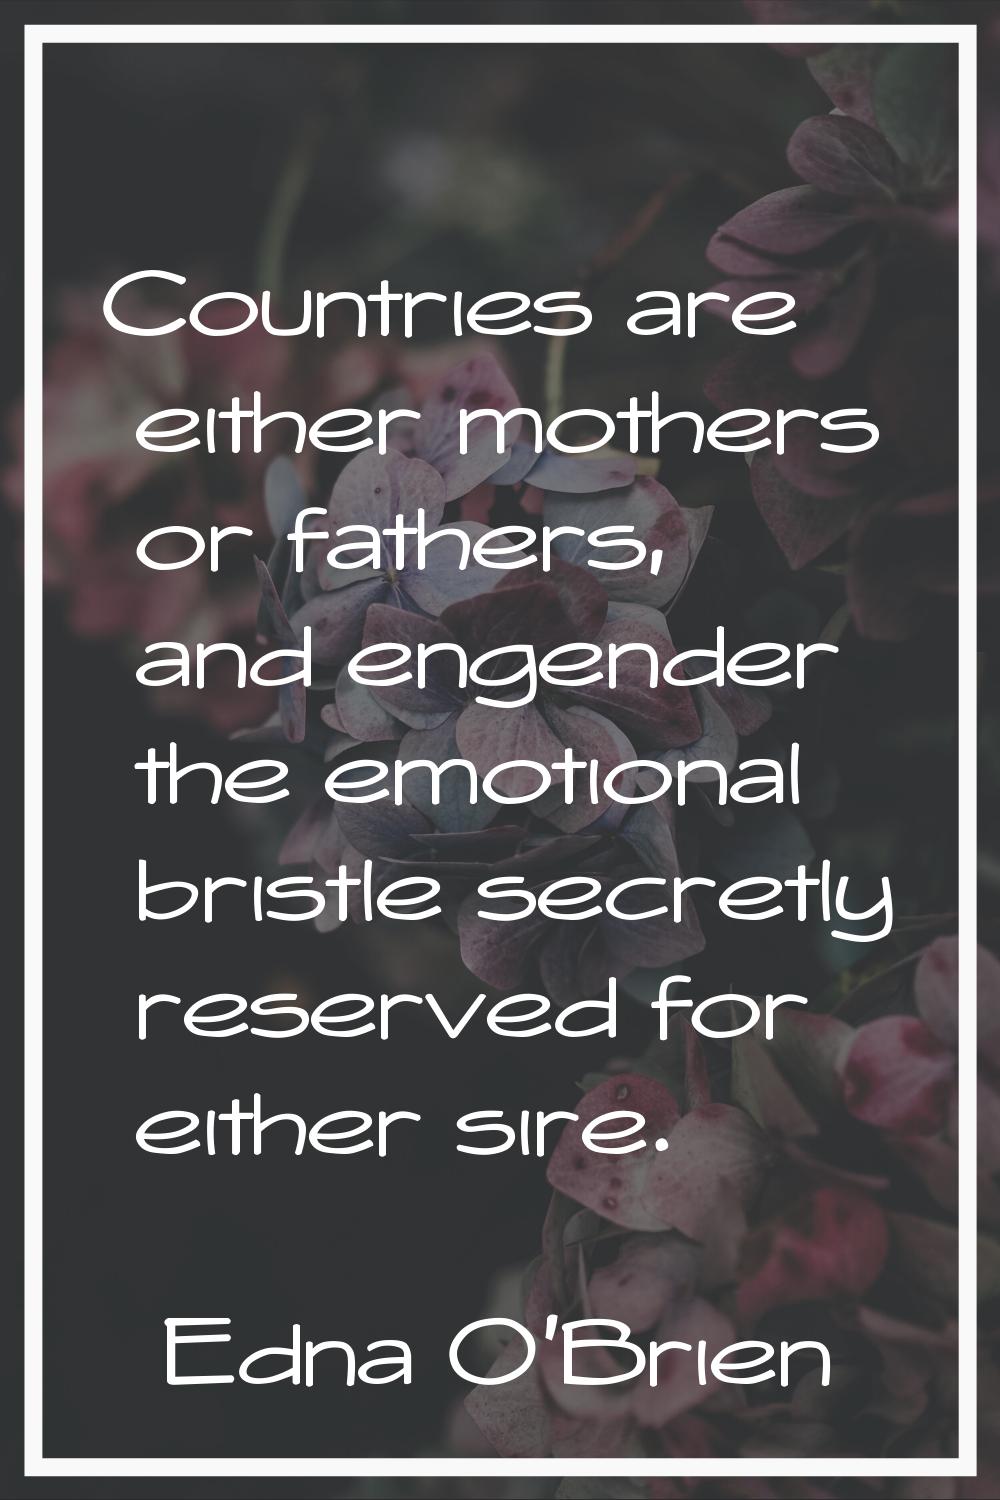 Countries are either mothers or fathers, and engender the emotional bristle secretly reserved for e